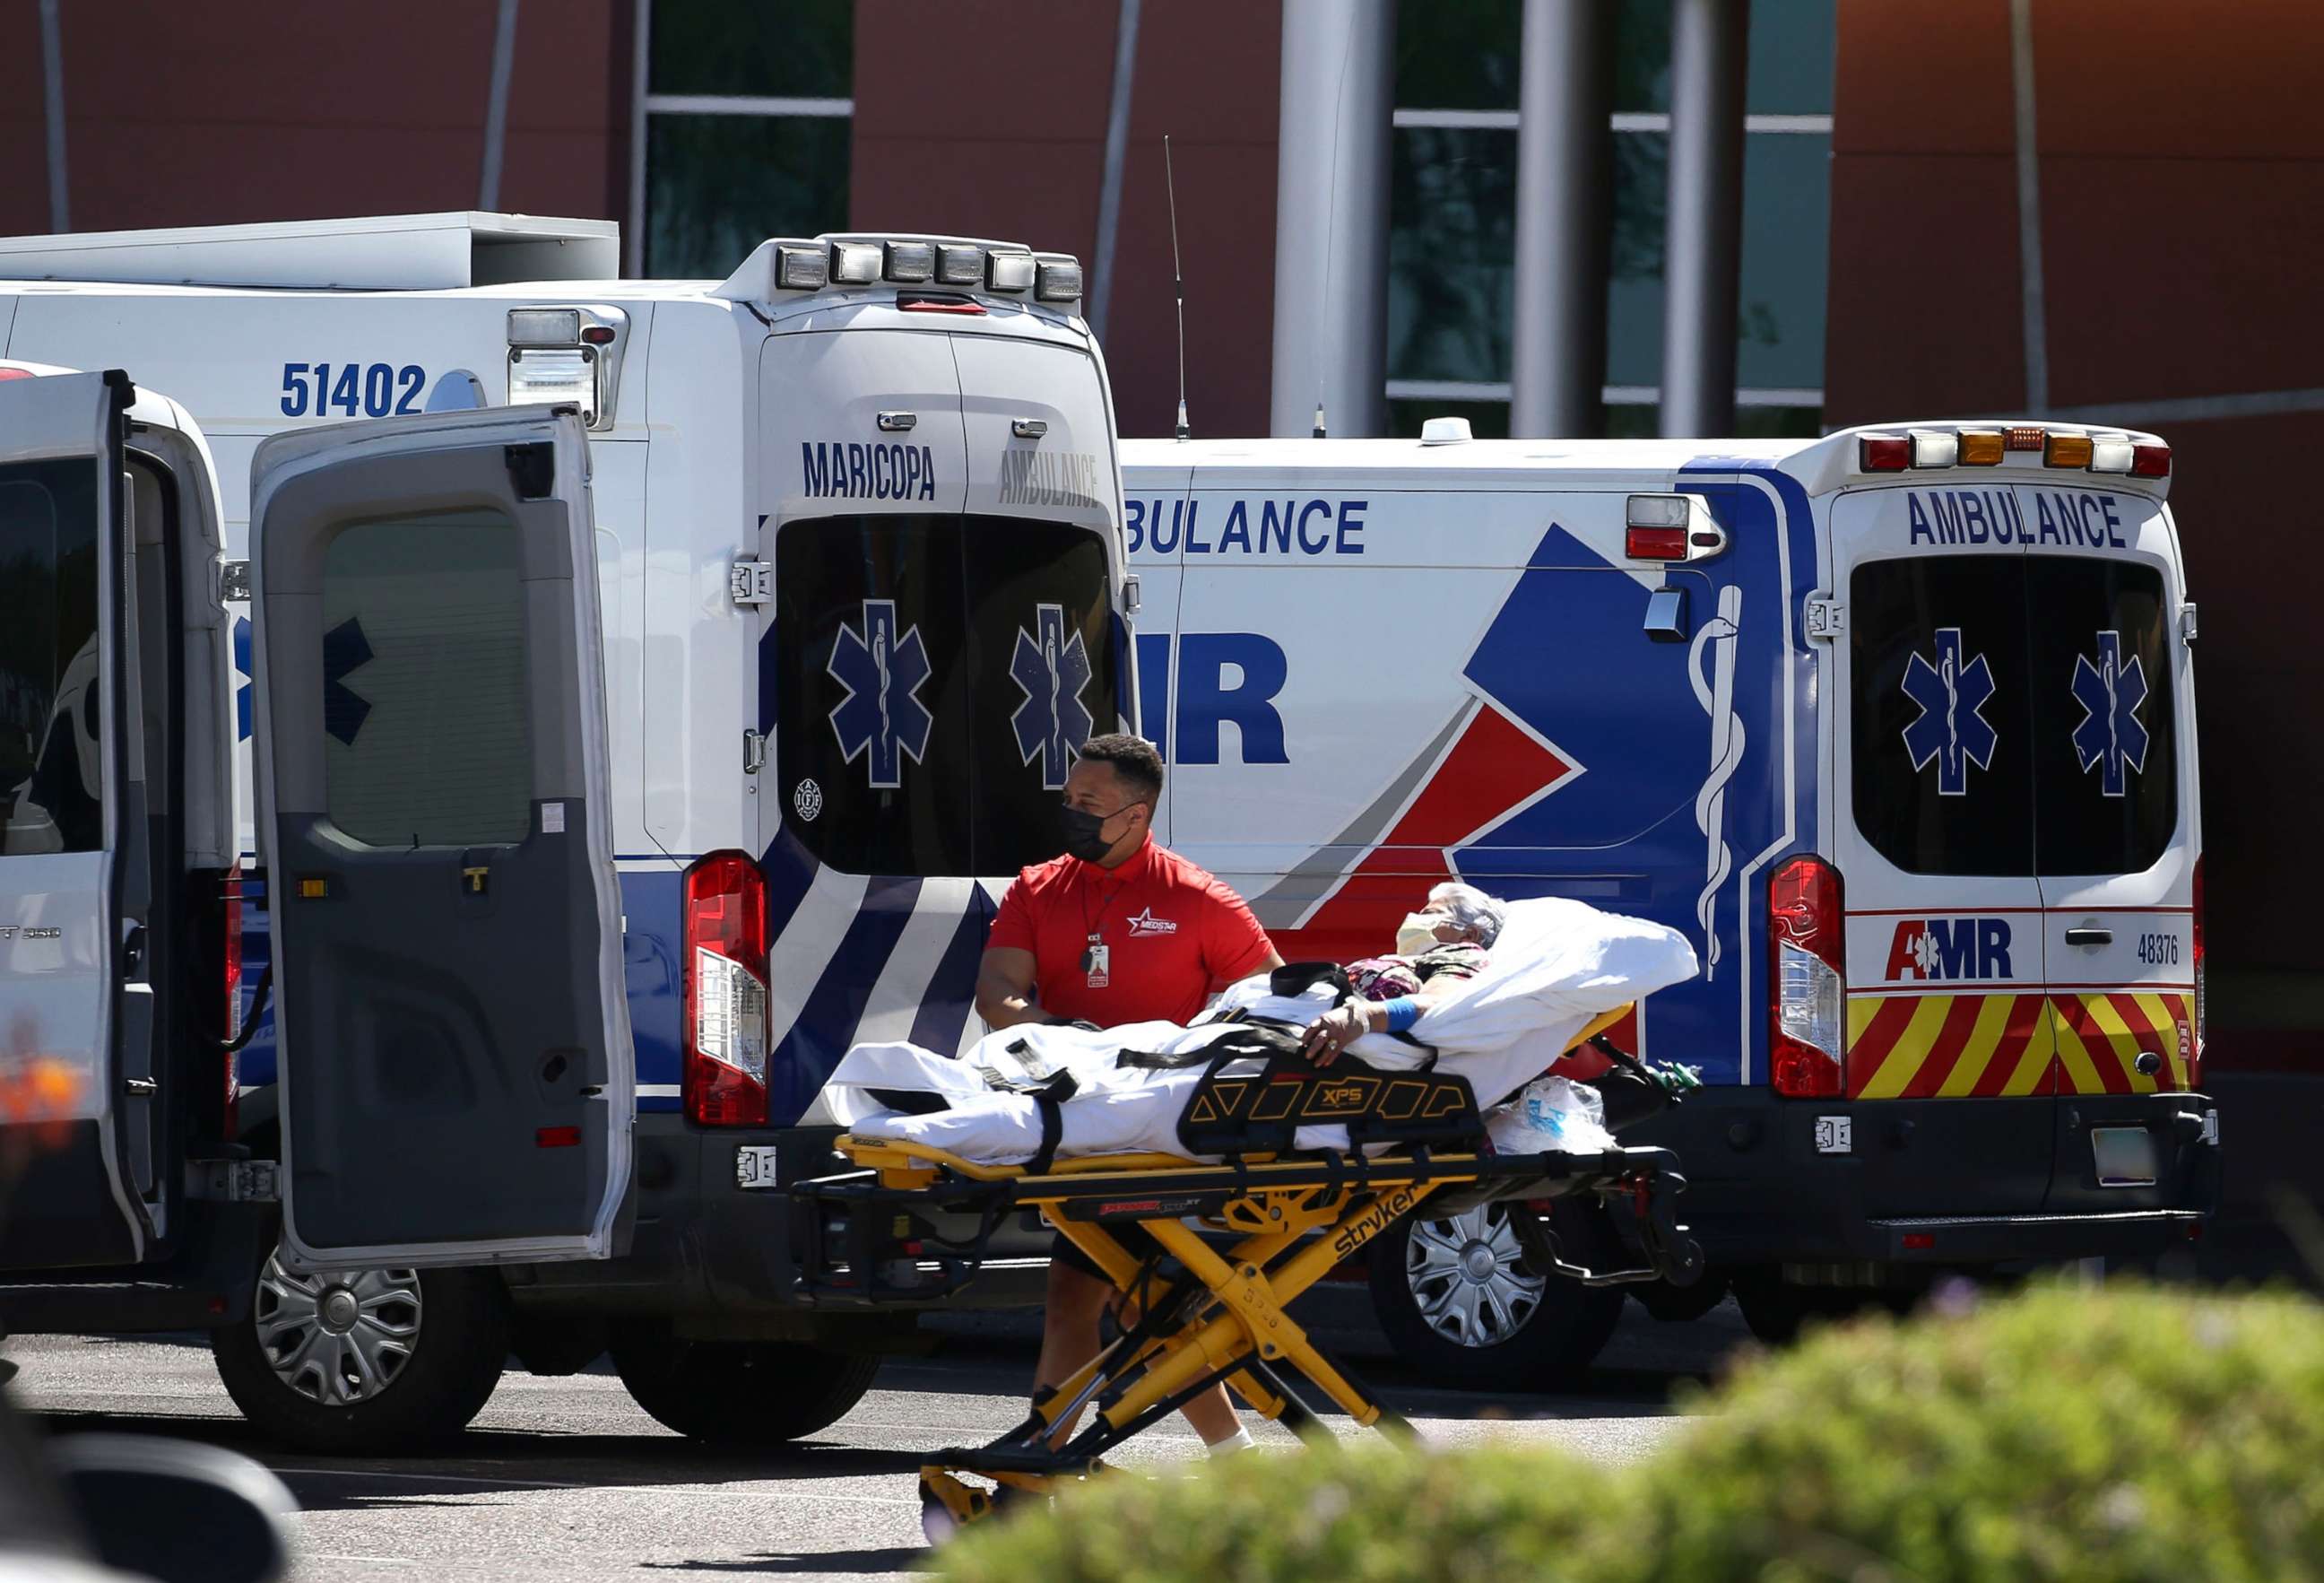 PHOTO: A person is brought to a medical transport vehicle from Banner Desert Medical Center as several transports and ambulances are shown parked outside the emergency room entrance, June 16, 2020, in Mesa, Ariz. 